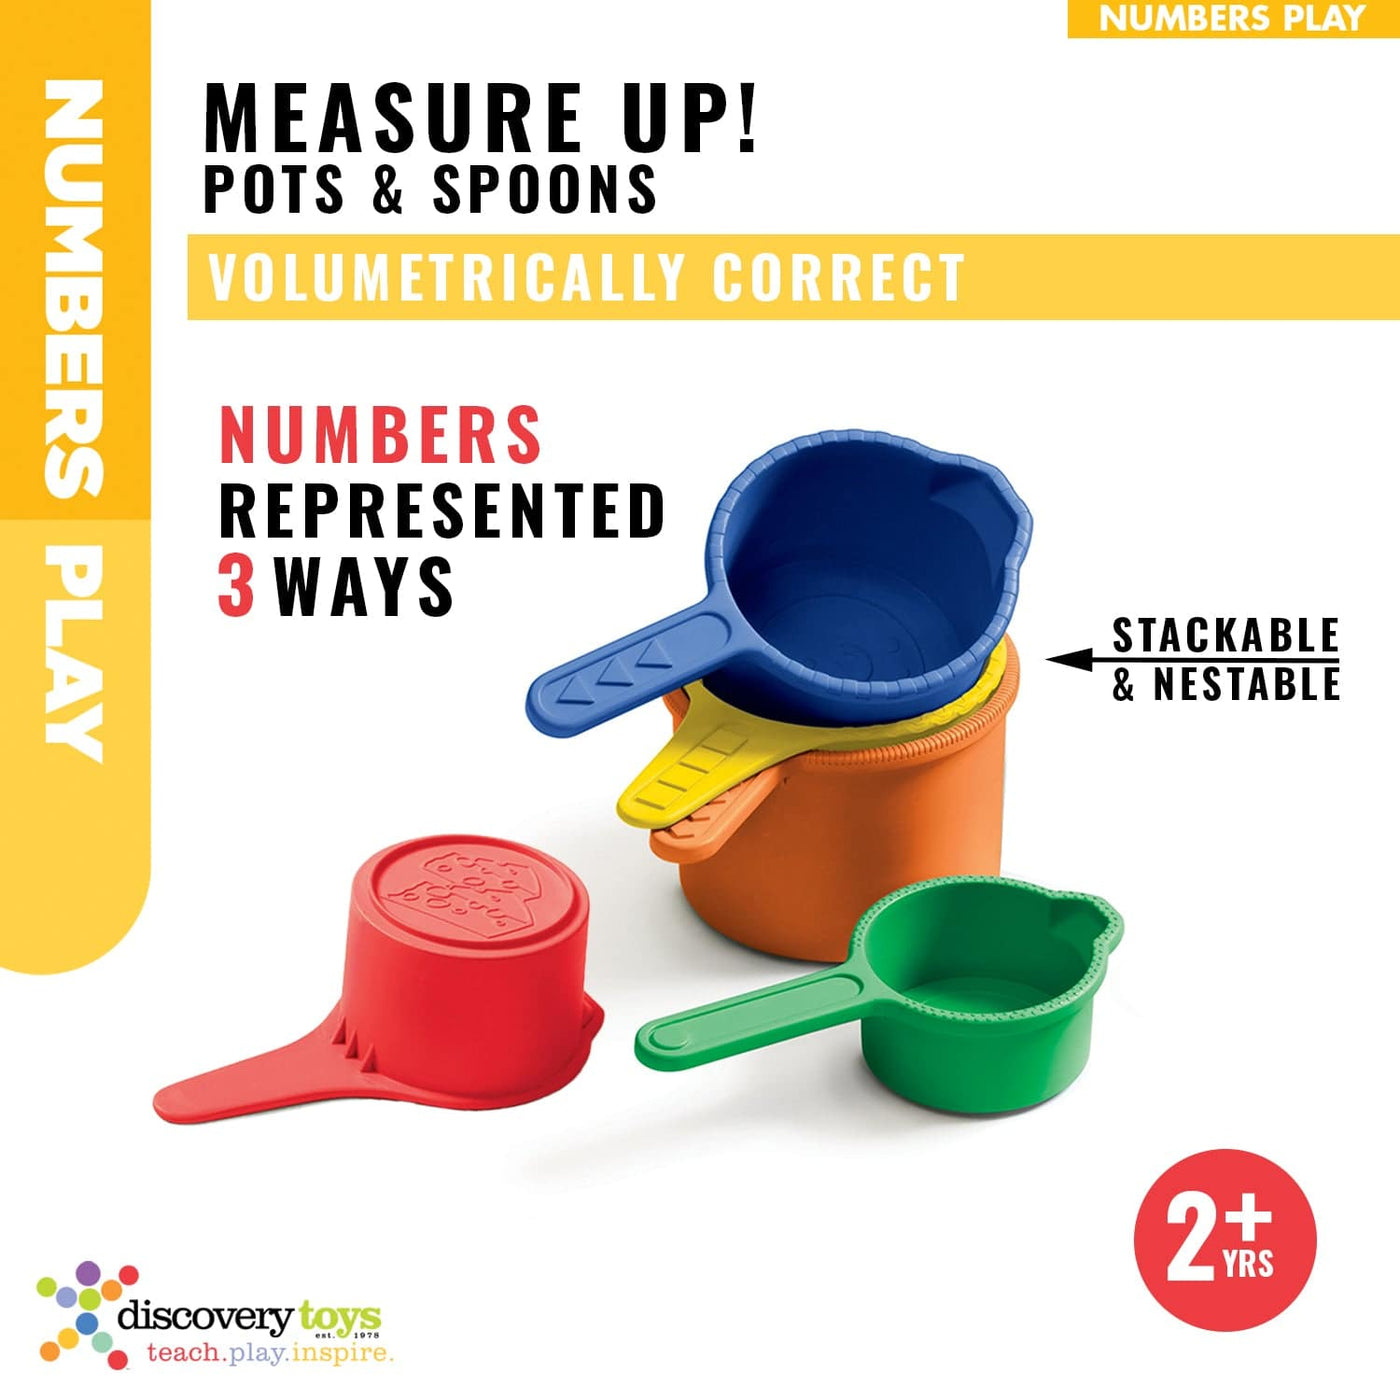 MEASURE UP! COLLECTION Stacking Educational Toy (Save $2.00) - Discovery Toys